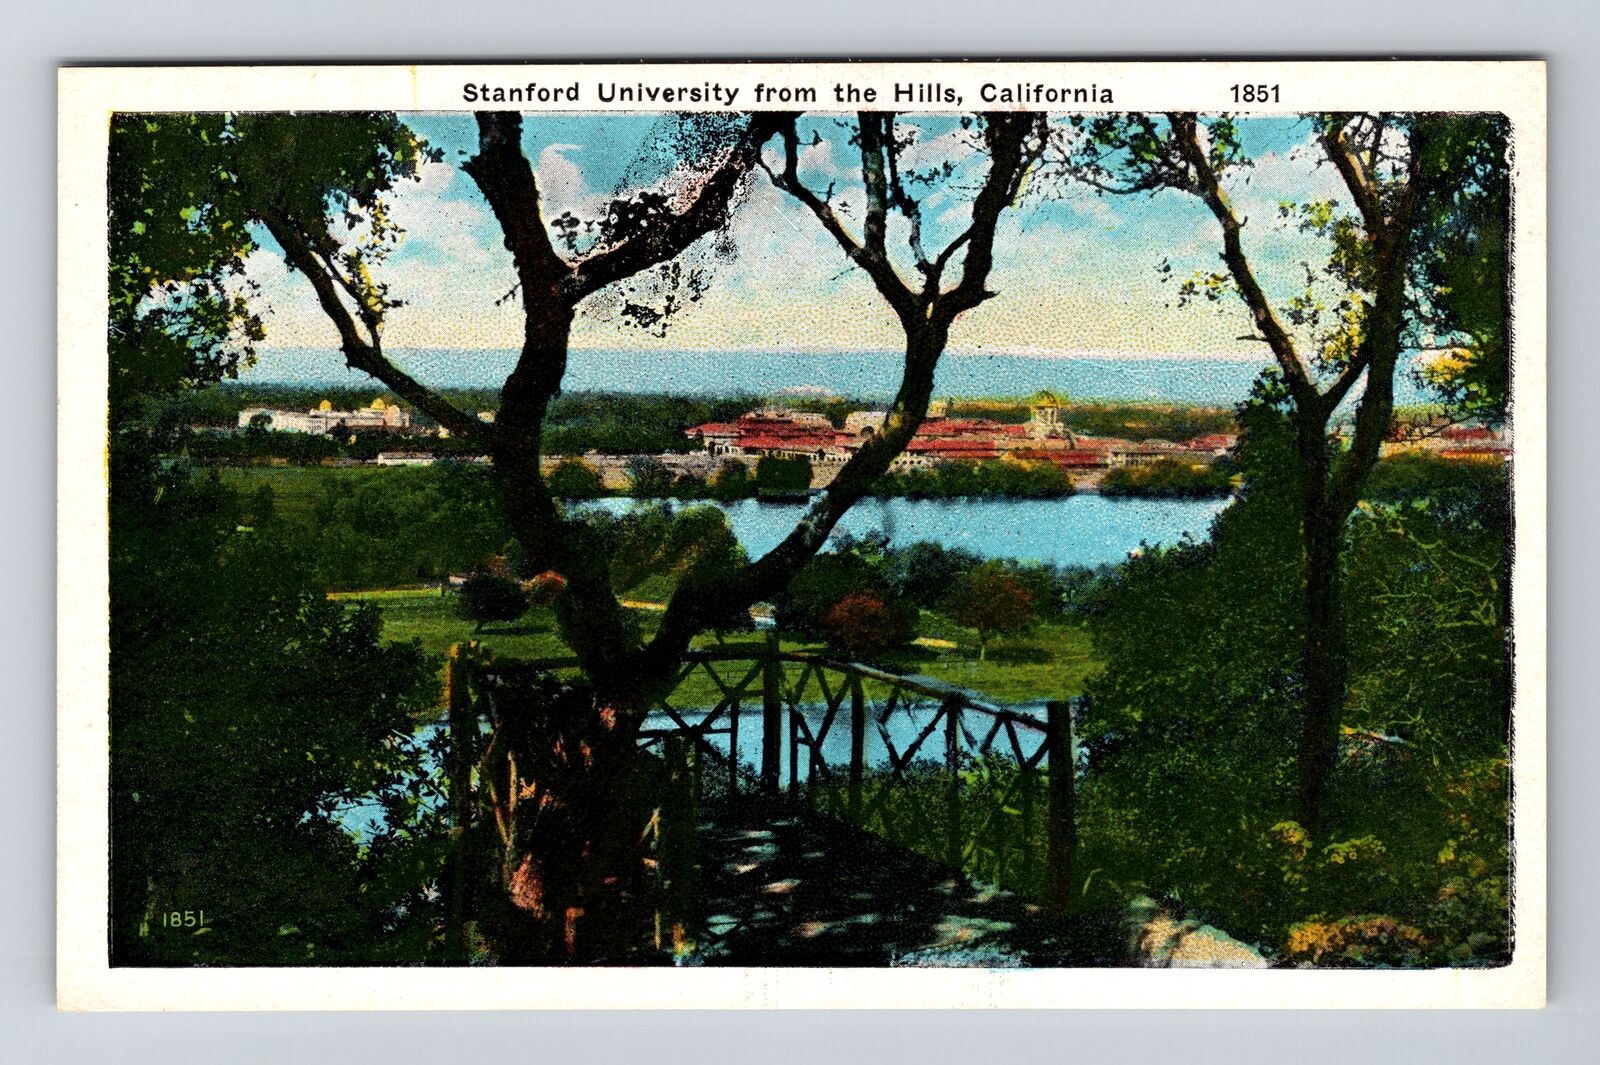 Stanford CA-California, Stanford University from Hills, Vintage Postcard